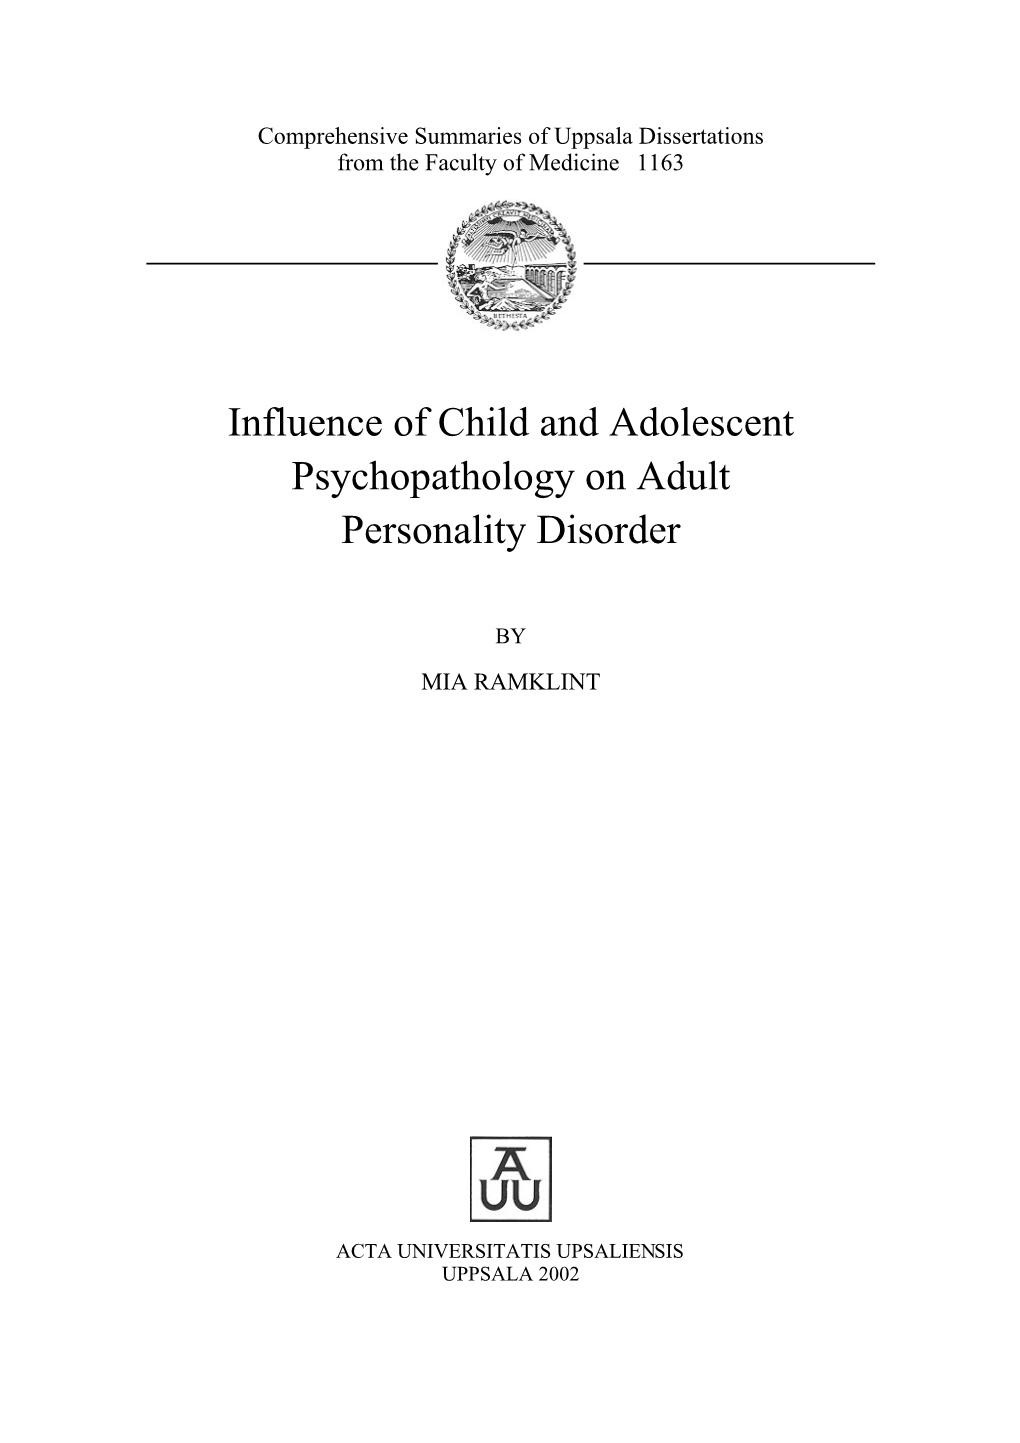 Influence of Child and Adolescent Psychopathology on Adult Personality Disorder